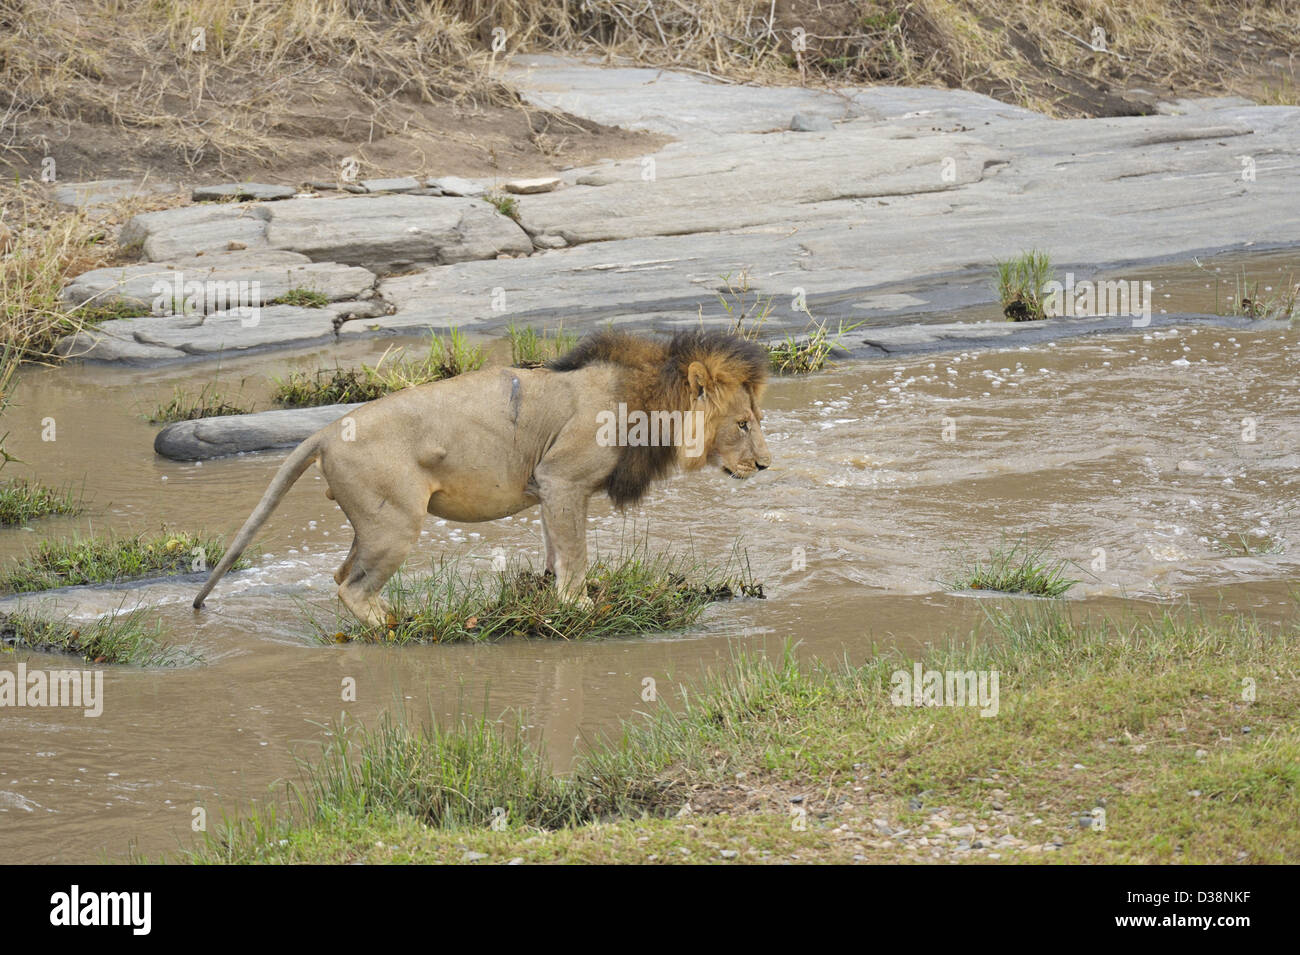 Male lion crossing the Talek river in the forests of Masai Mara, Kenya, Africa Stock Photo